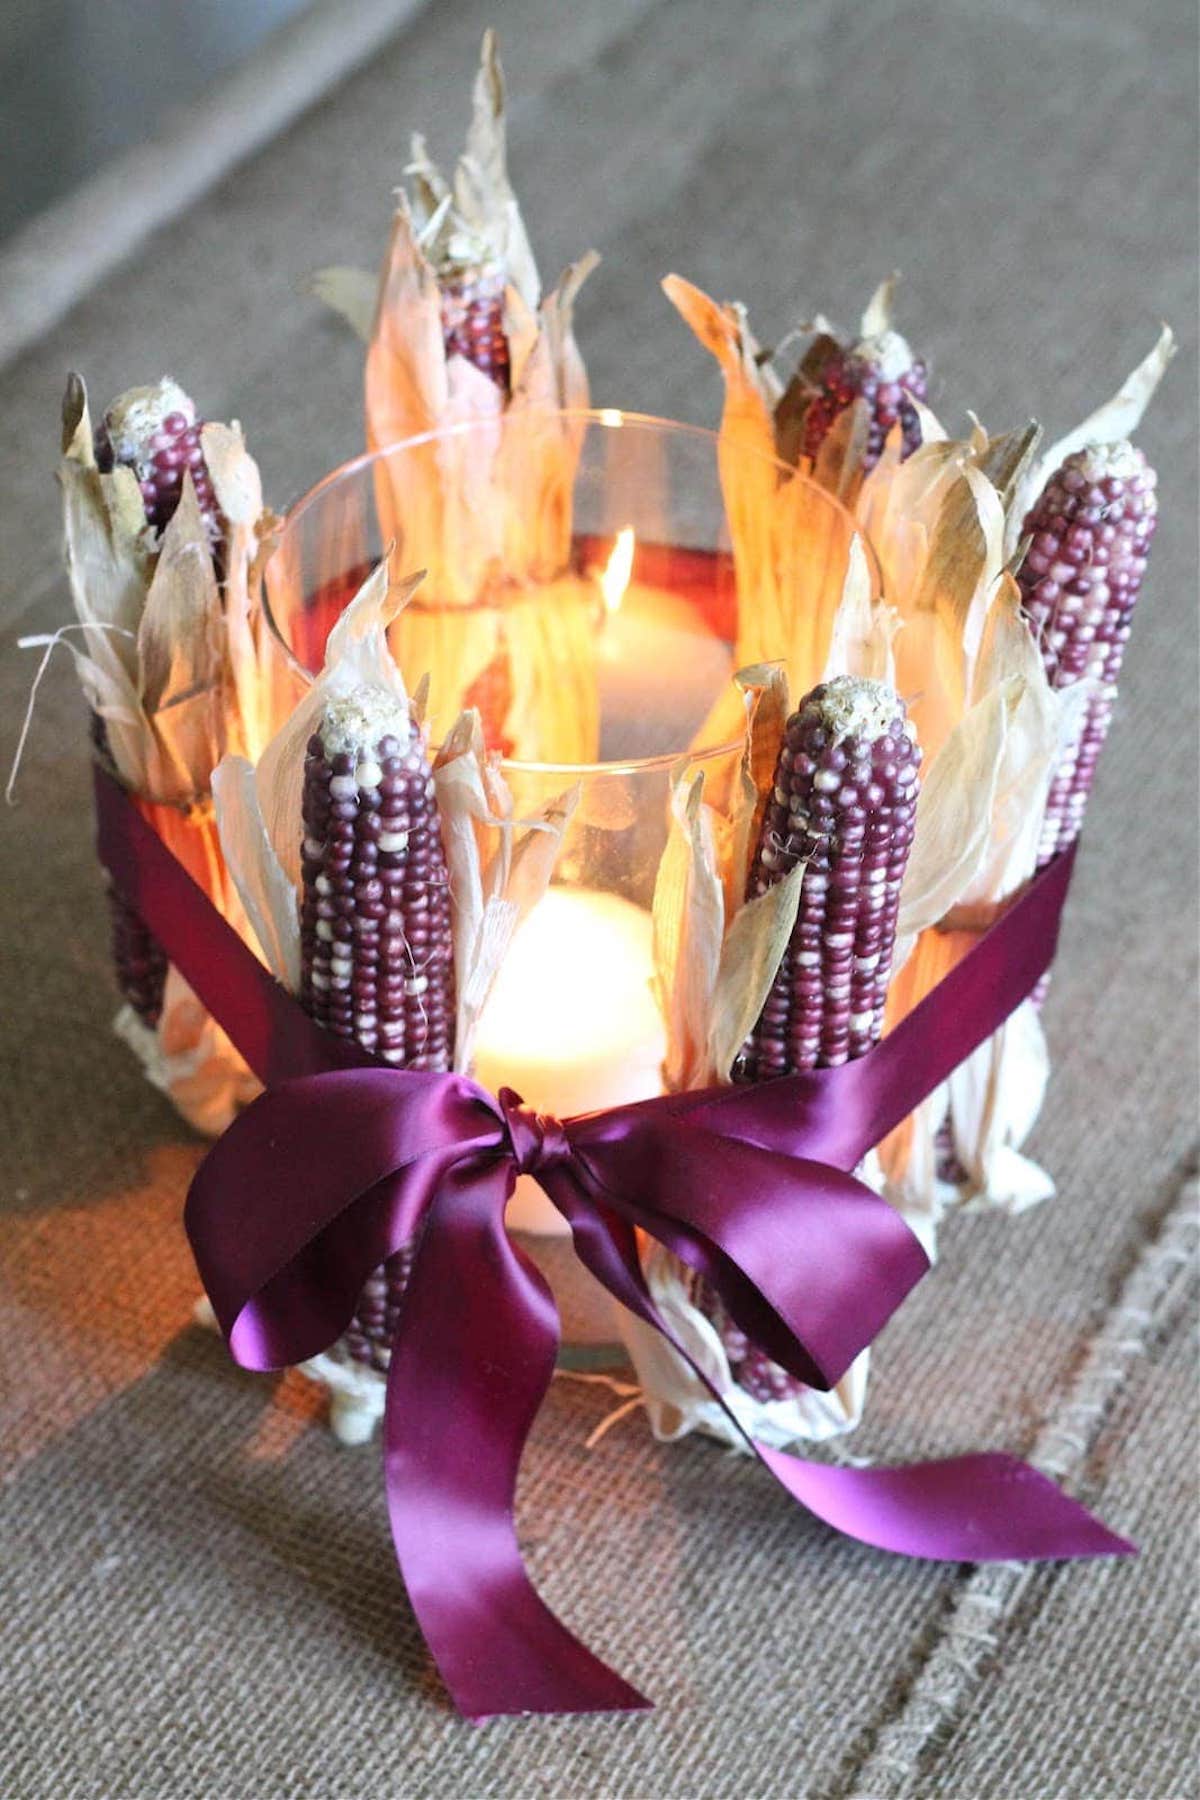 Corn on the cob candle holder perfect for a Thanksgiving table setting.